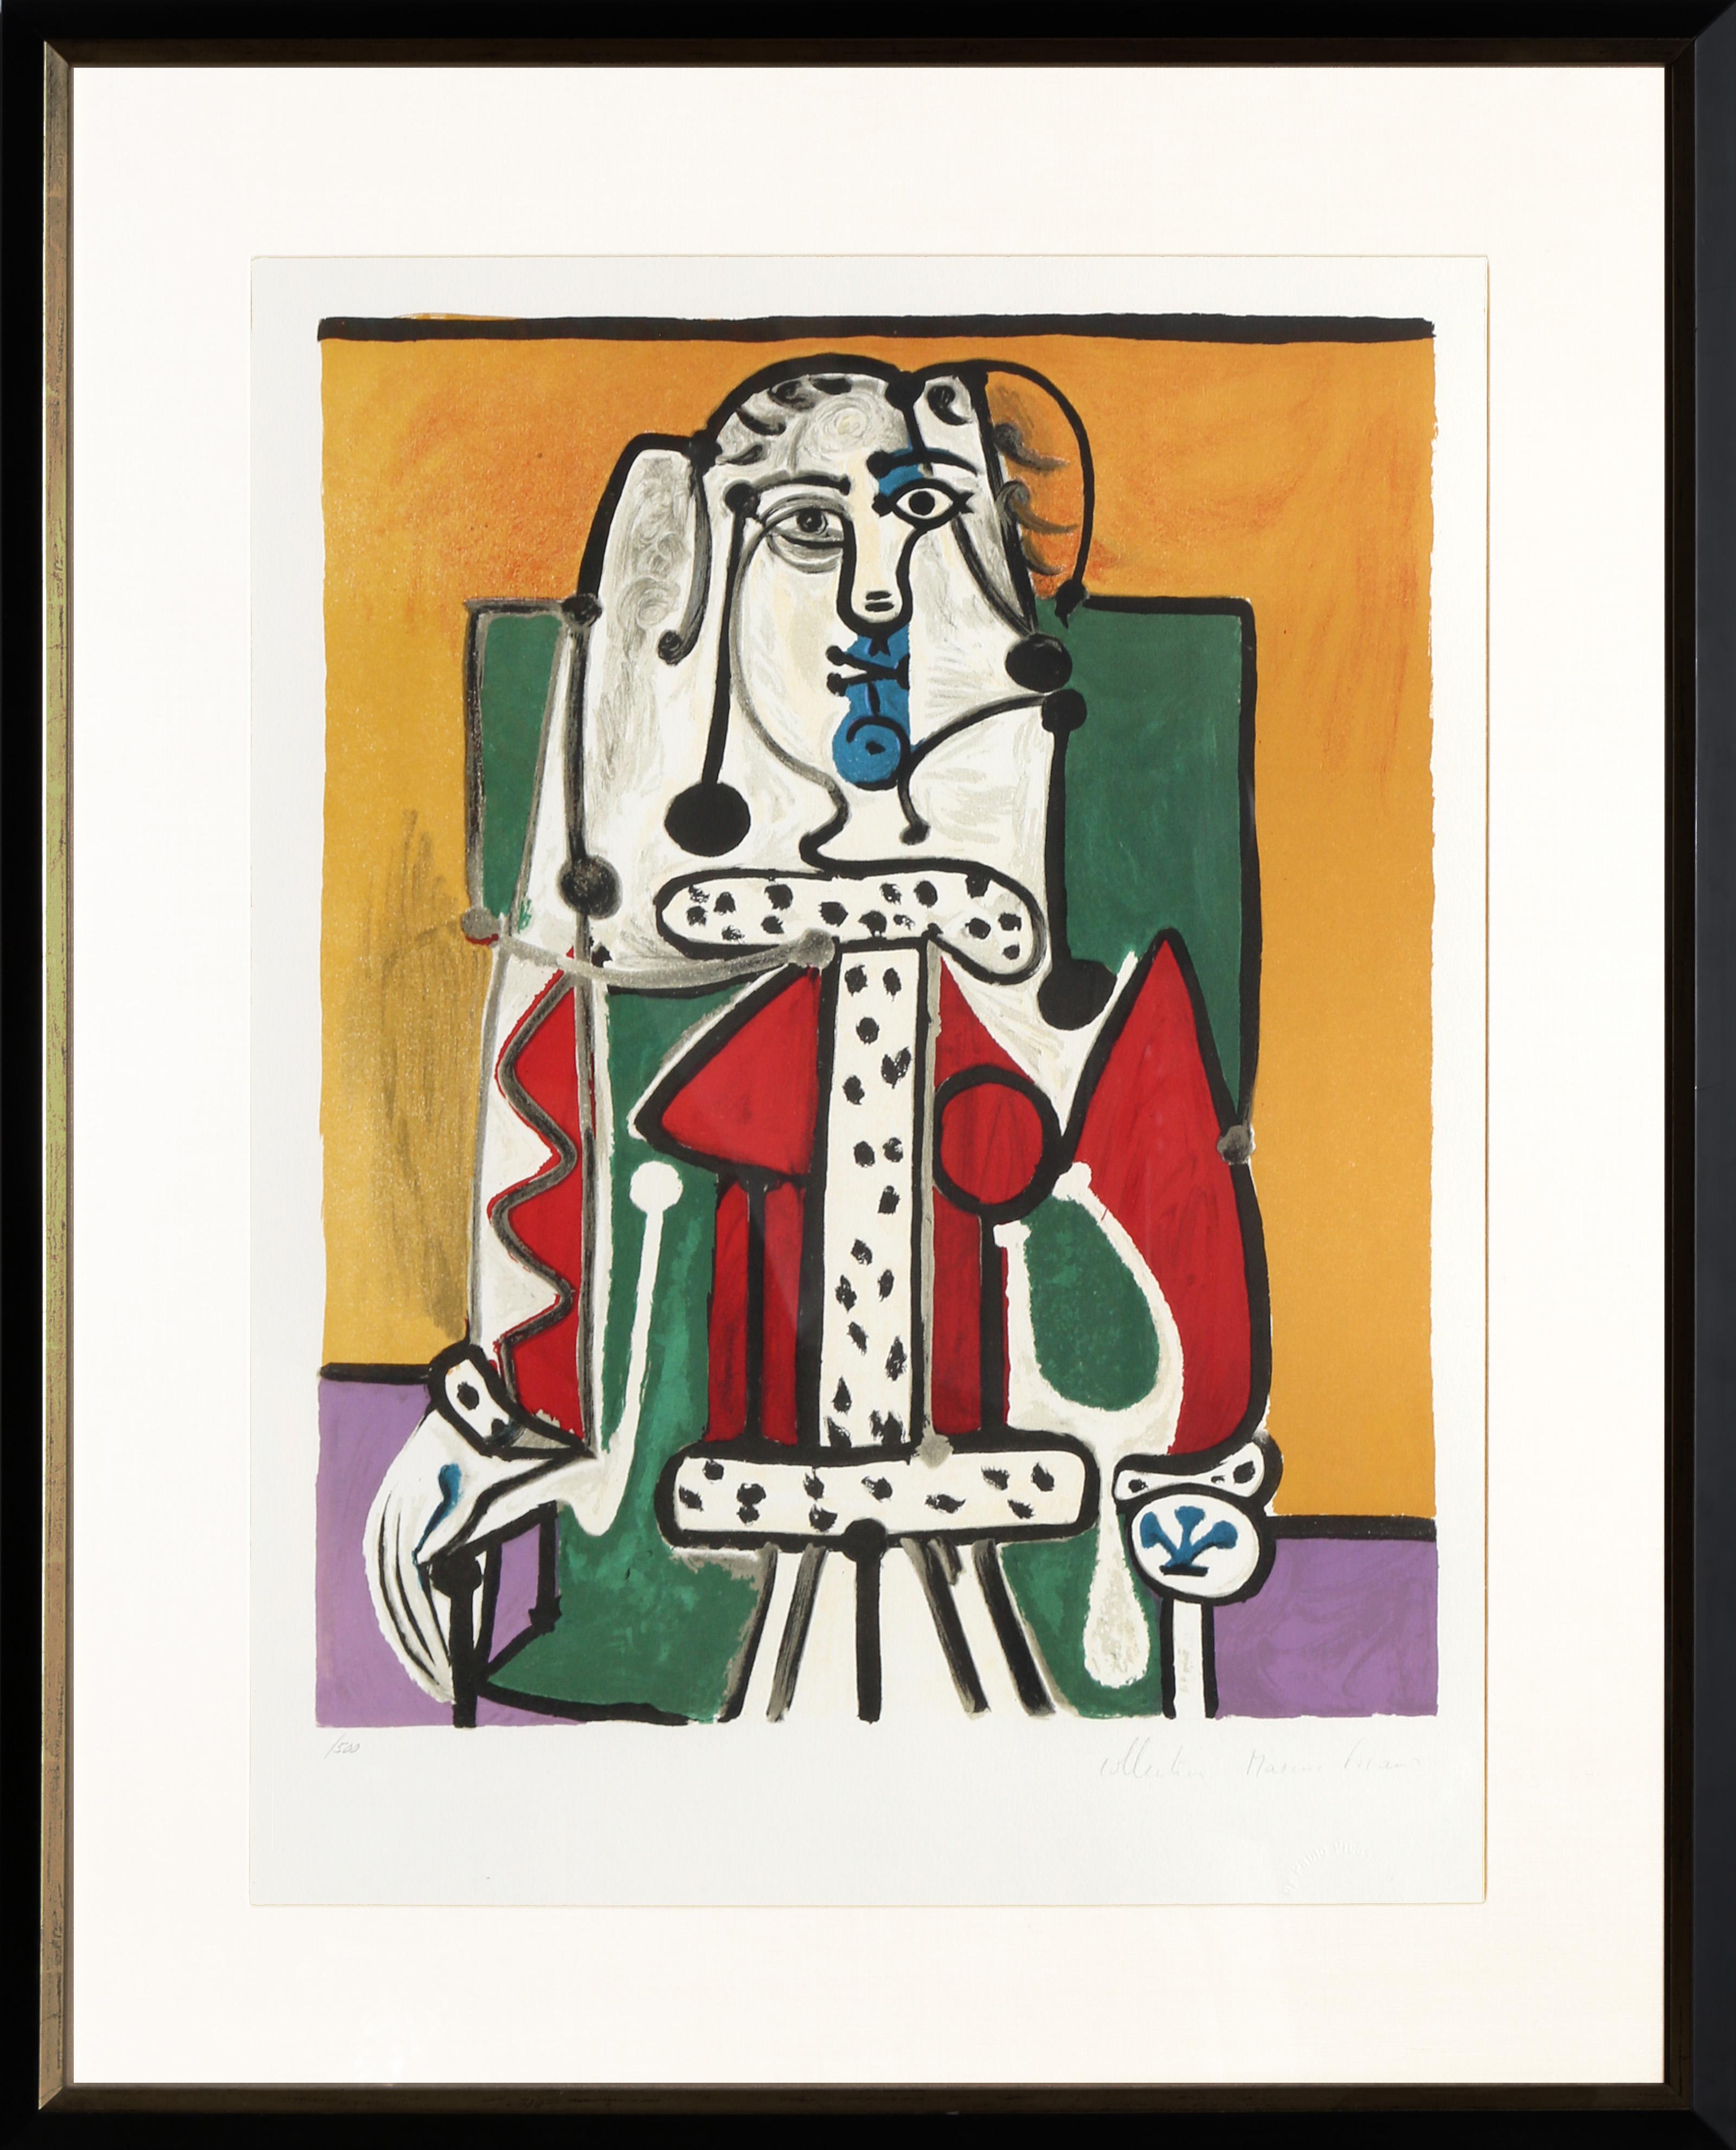 A lithograph from the Marina Picasso Estate Collection after the Pablo Picasso painting "Femme dans un Fauteuil", which recently sold at auction for $10 million USD. The original painting was completed in 1948. In the 1970's after Picasso's death,